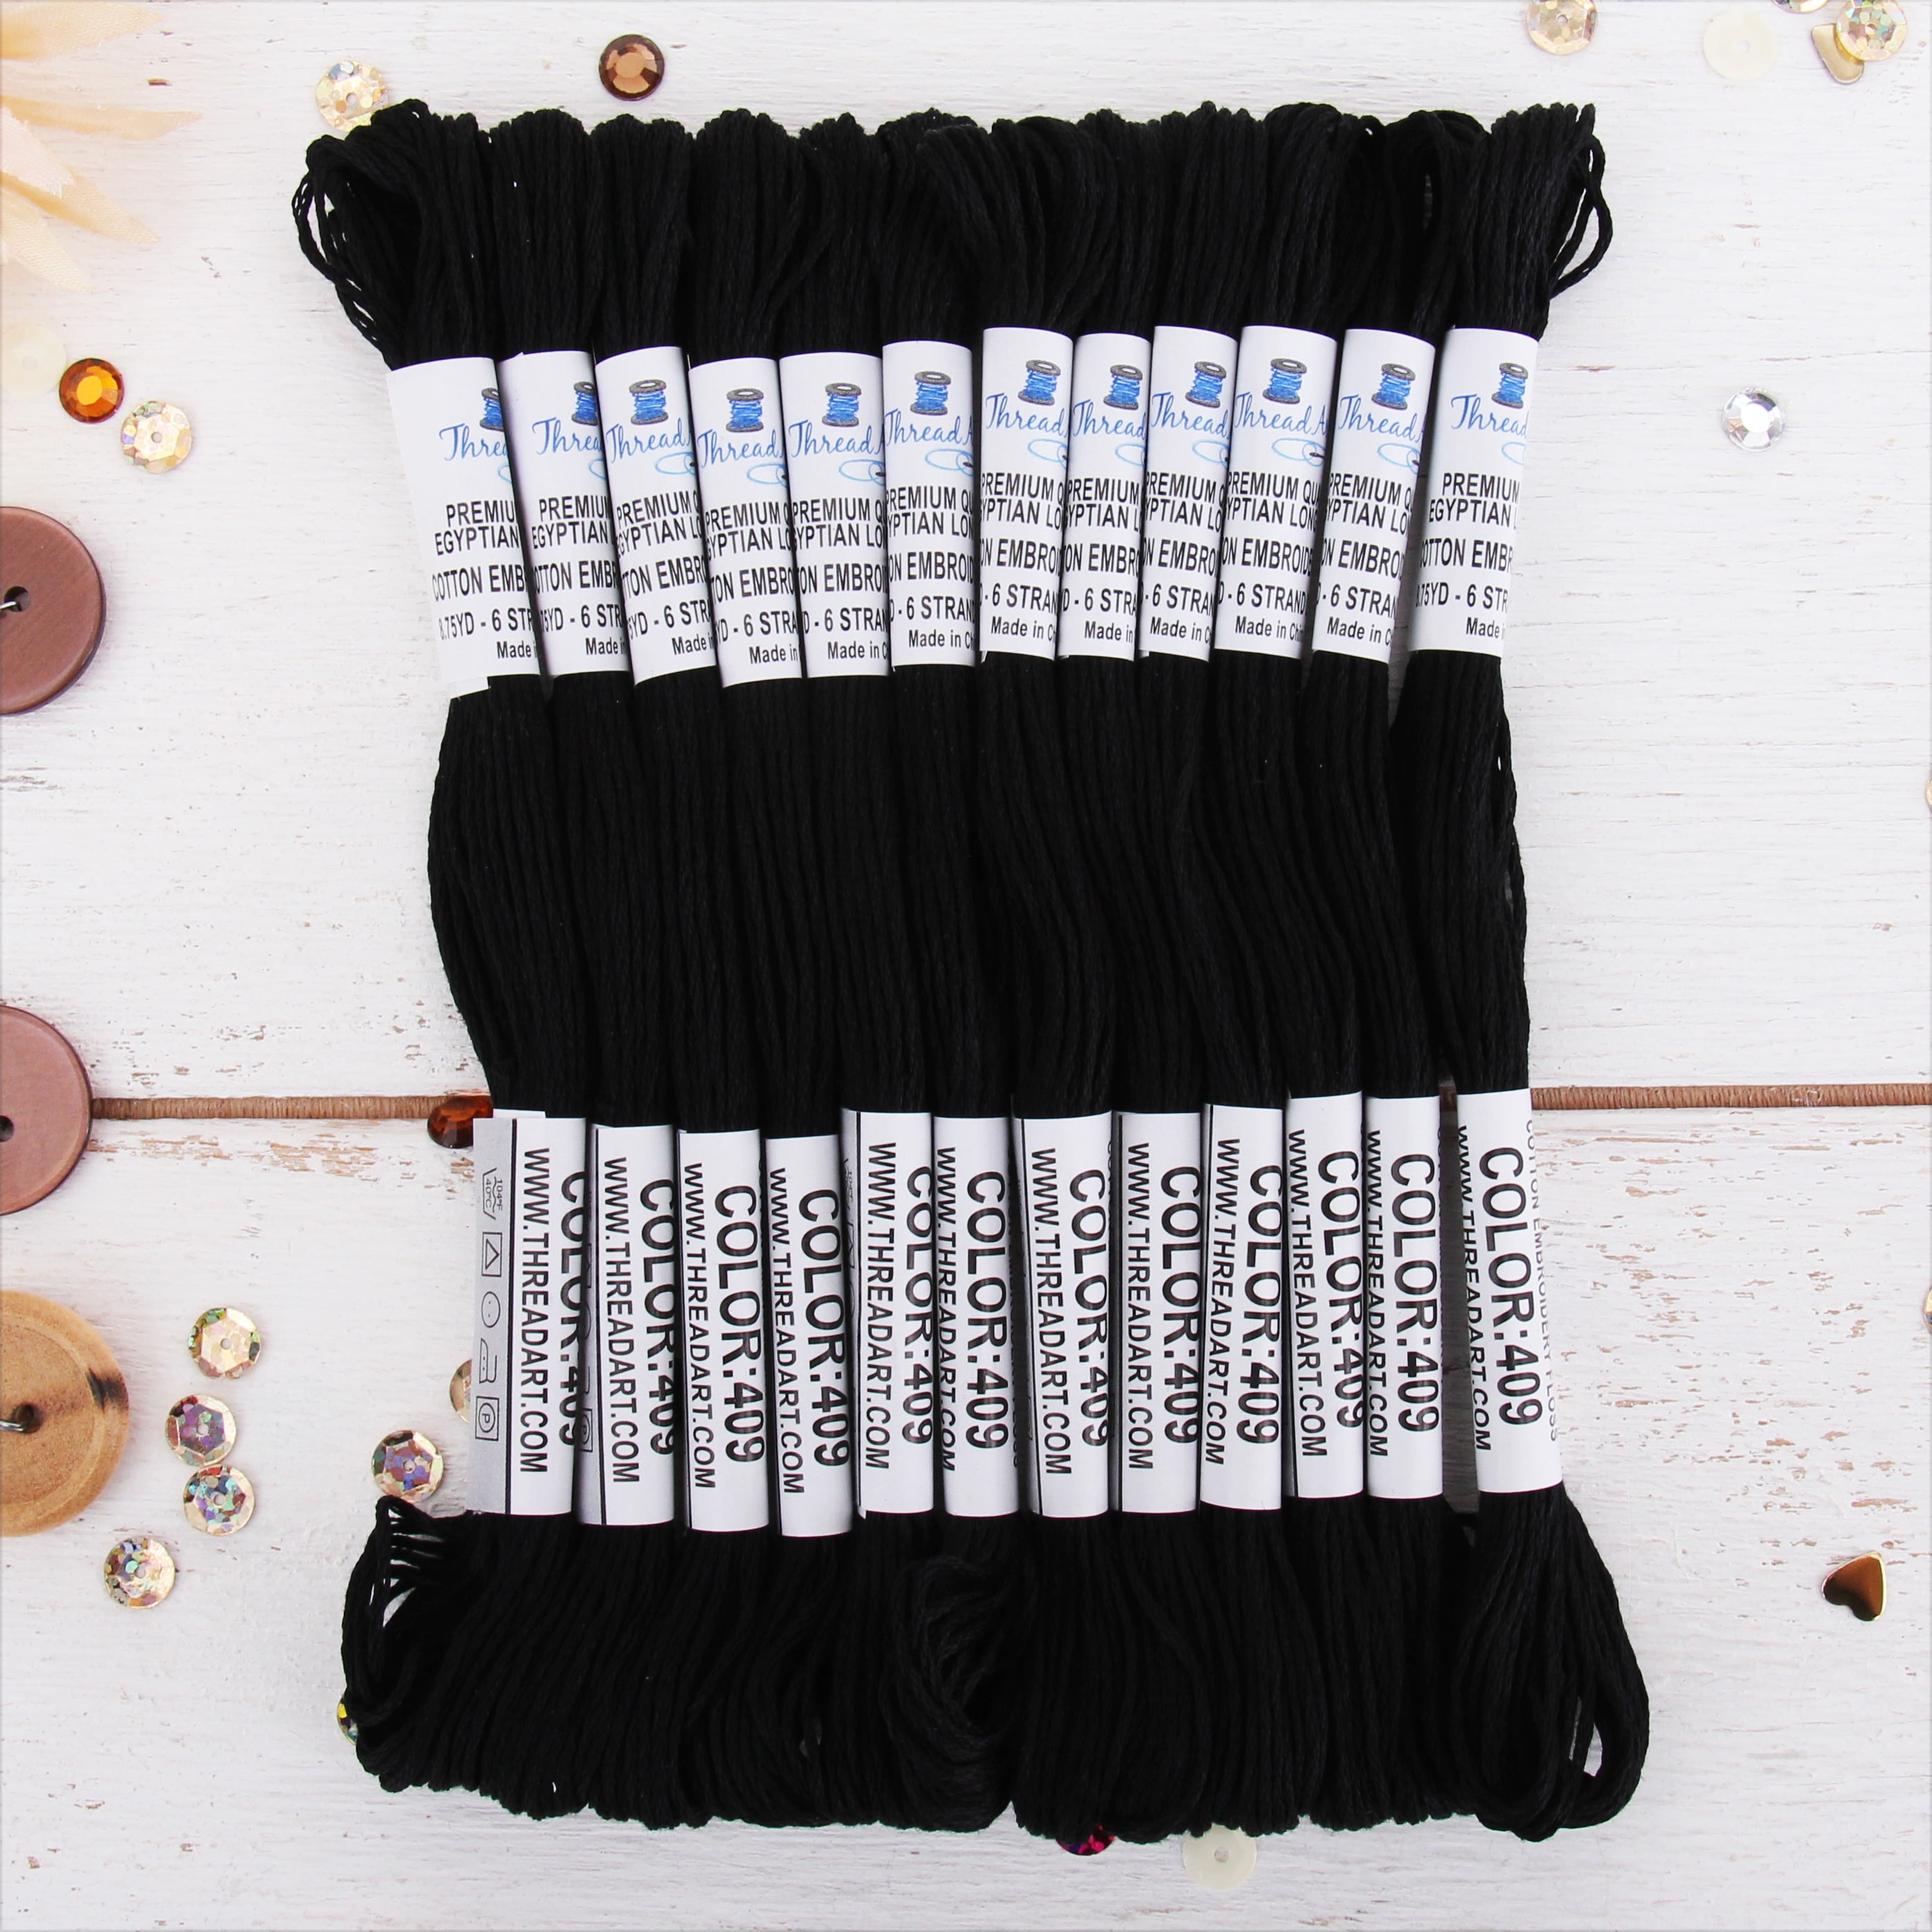 12 Skeins ThreadArt Premium Egyptian Long Fiber Cotton Embroidery Floss |  Black | Six Strand Divisible Thread 8.75yd Skeins For Hand Embroidery